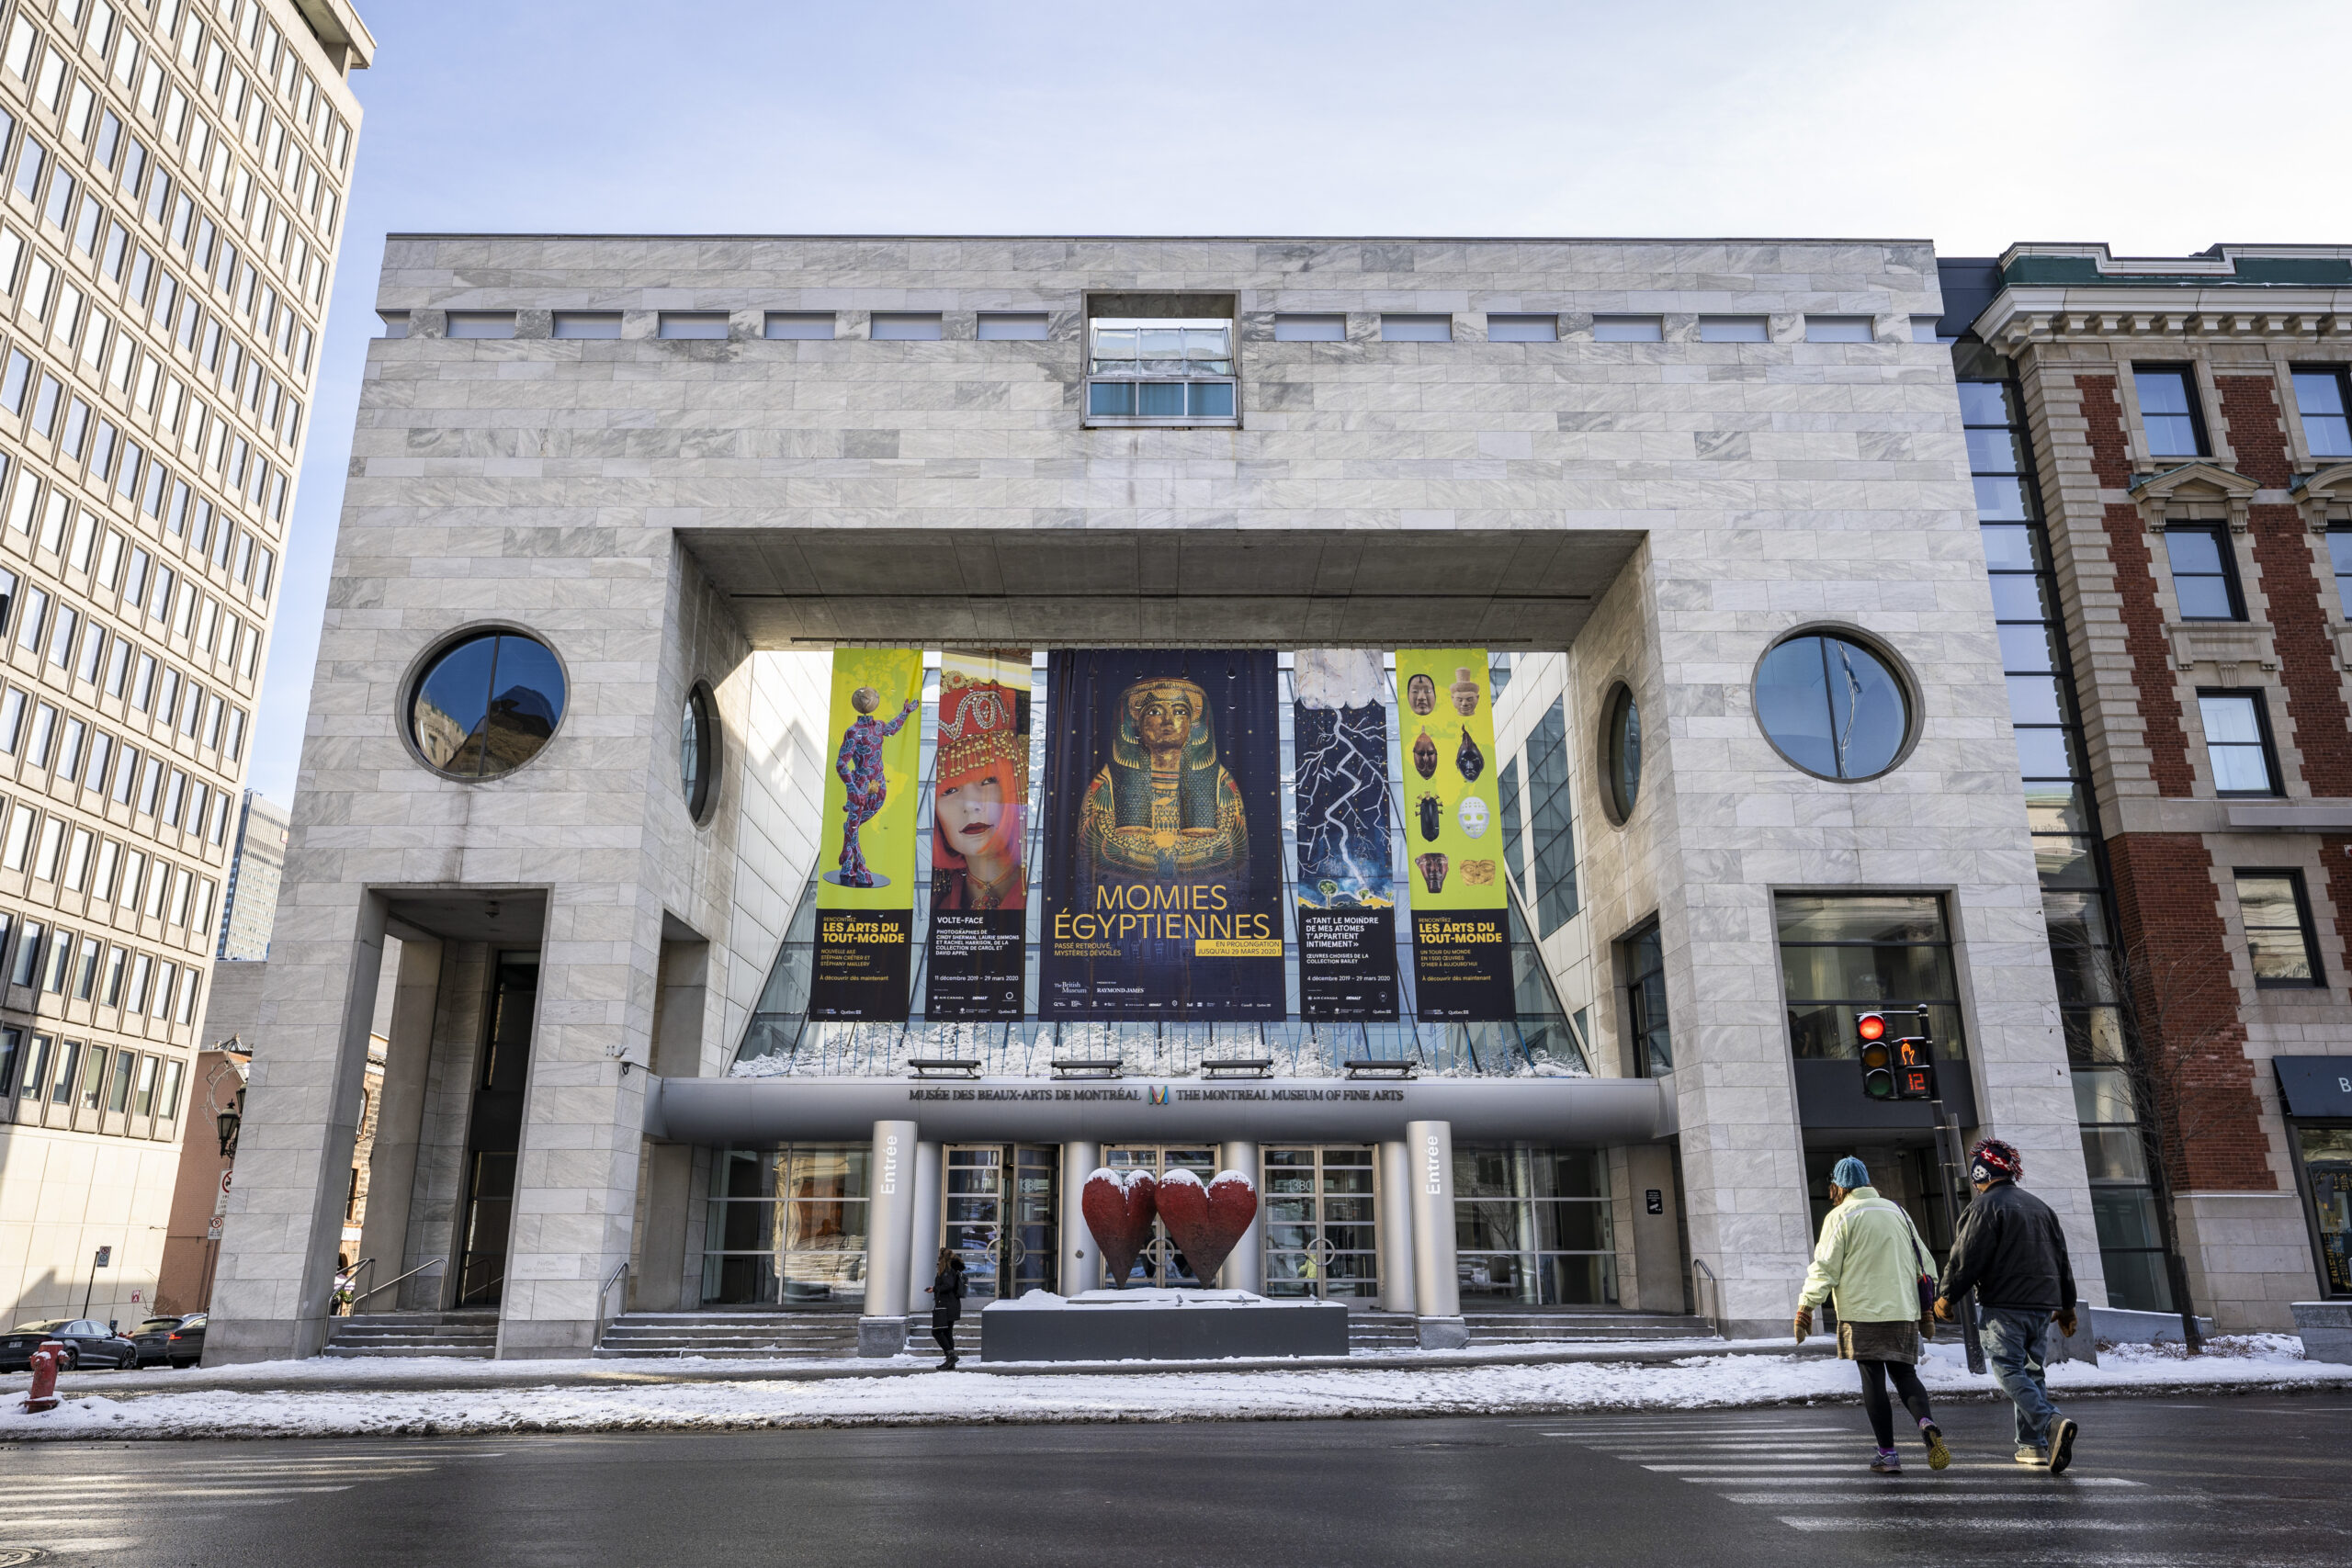 The Moshe Safdie design can be seen straight across the road, presenting a columned portico leading into a triangular glass-roofed lobby with posters above it on the exterior of the building that are advertising several museum exhibitions.